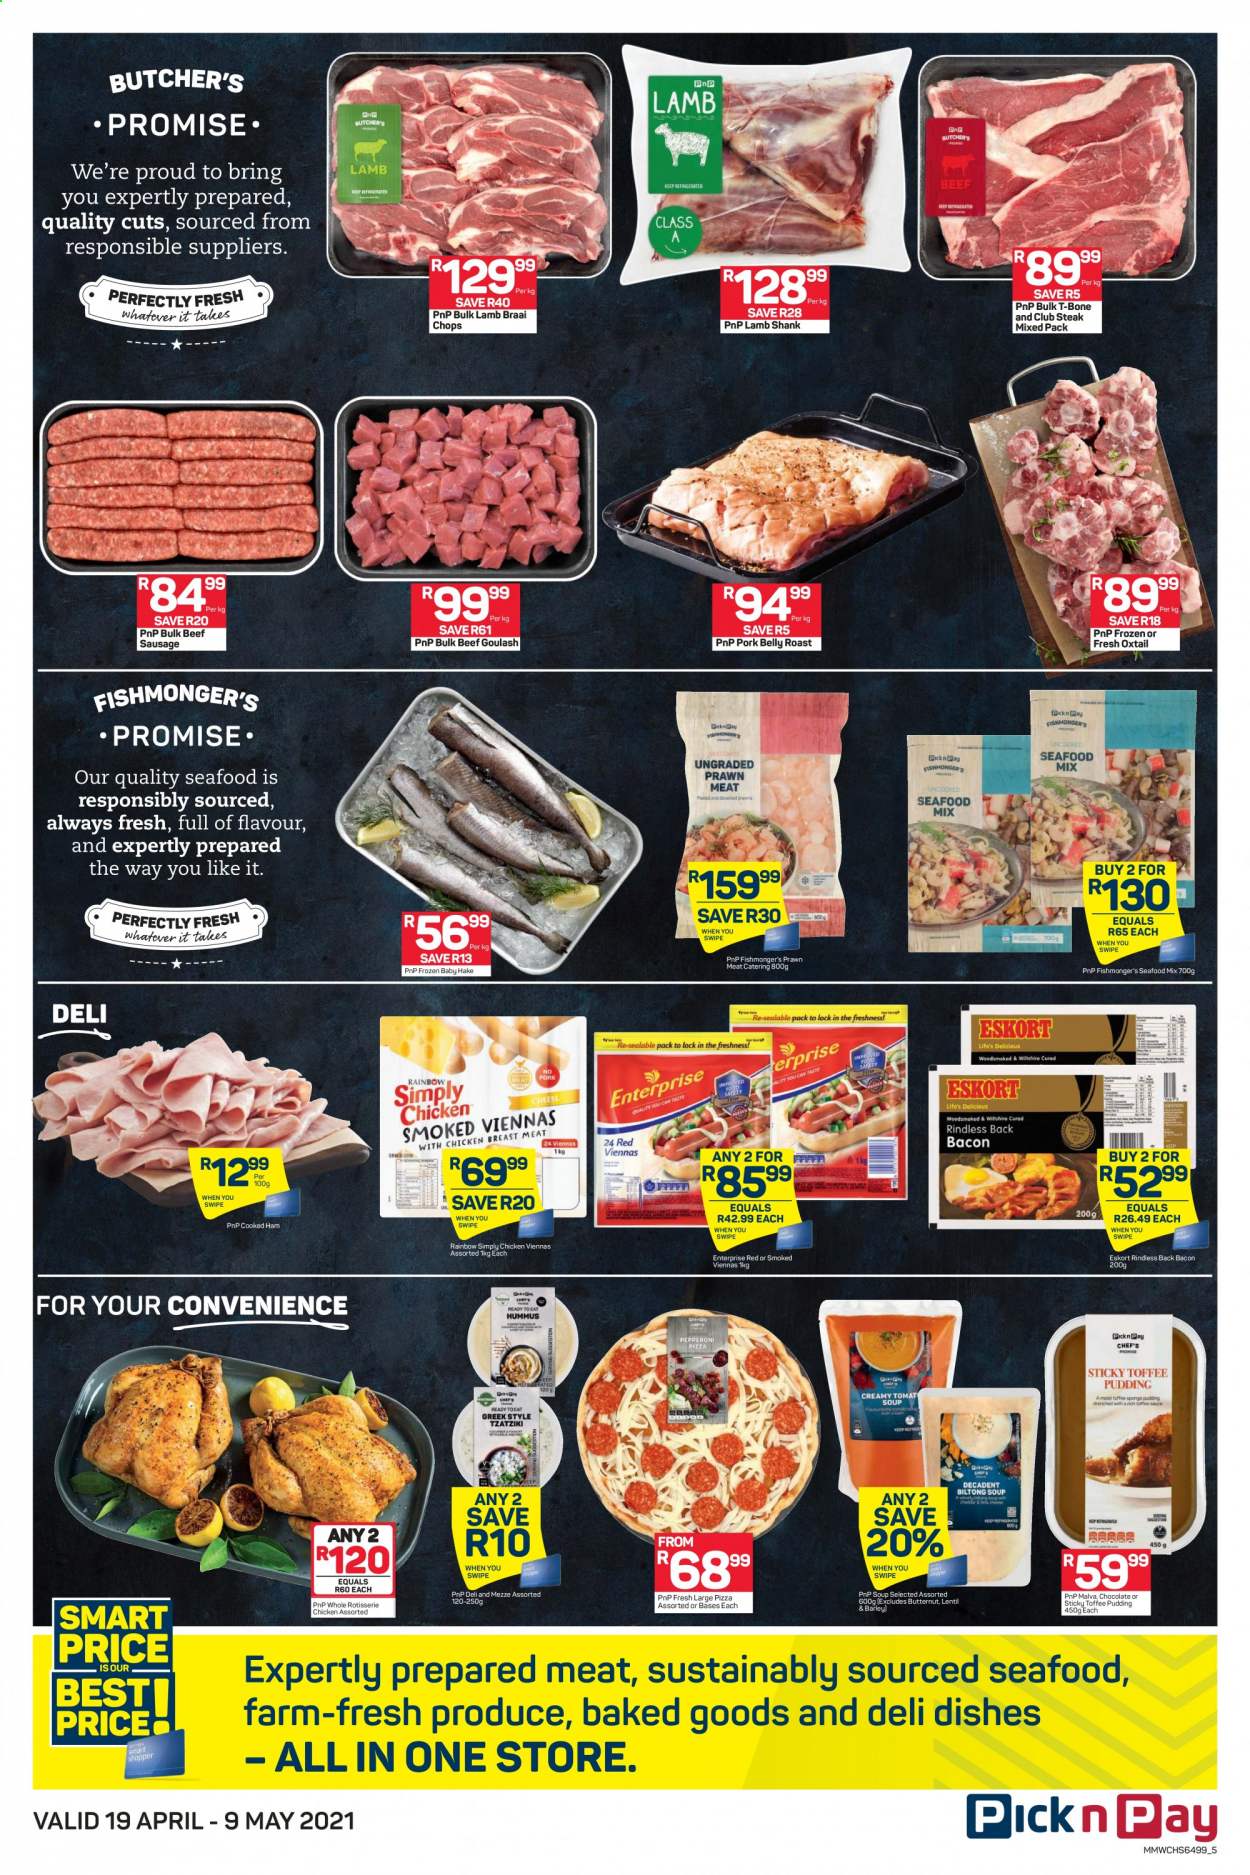 Pick n Pay specials - 04.19.2021 - 04.25.2021. 